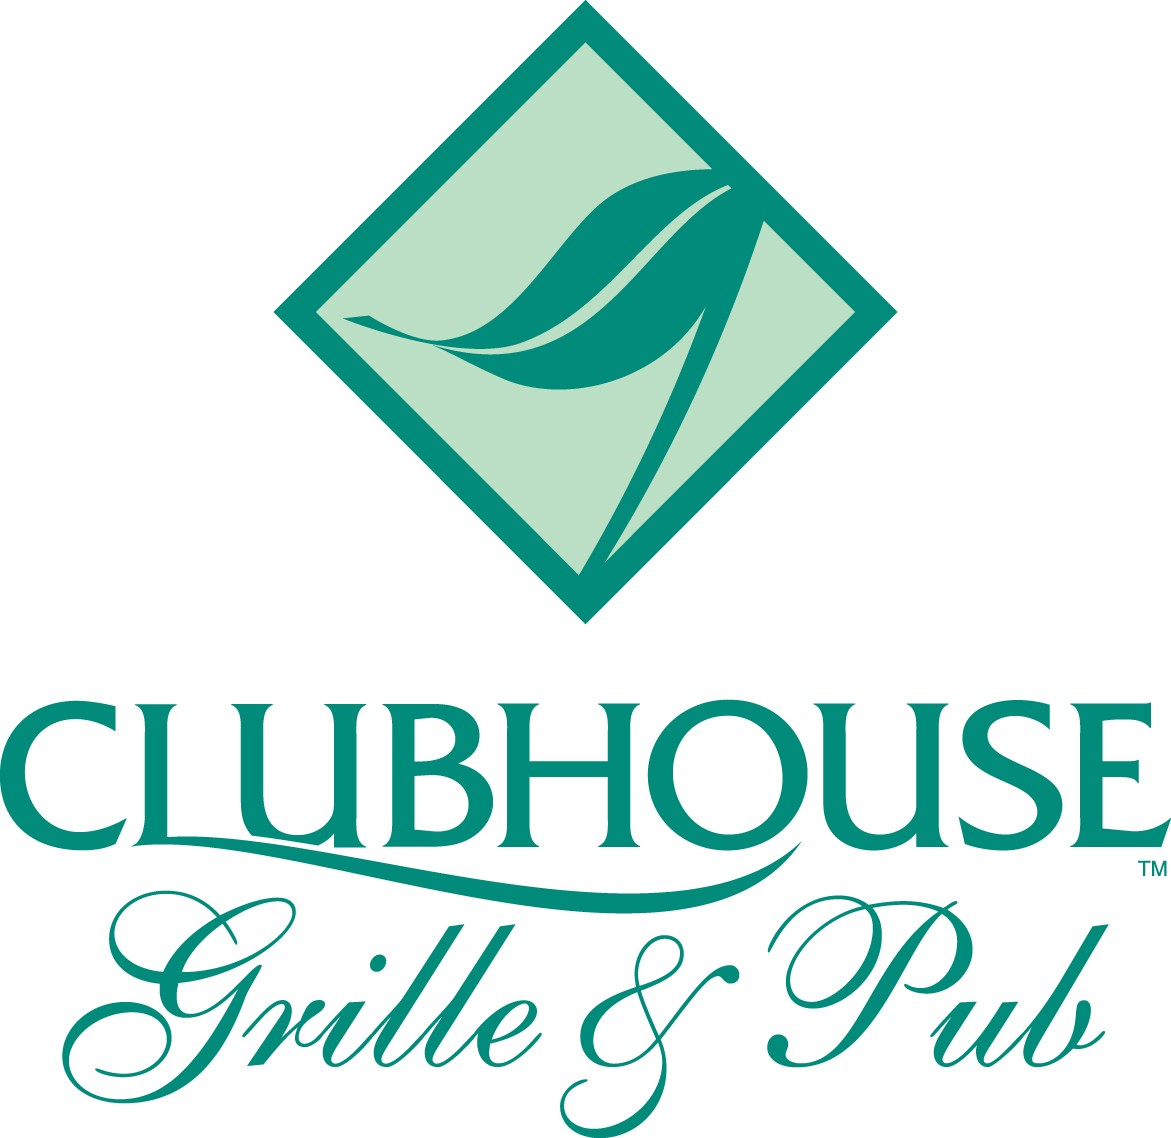 Clubhouse Grille & Pub